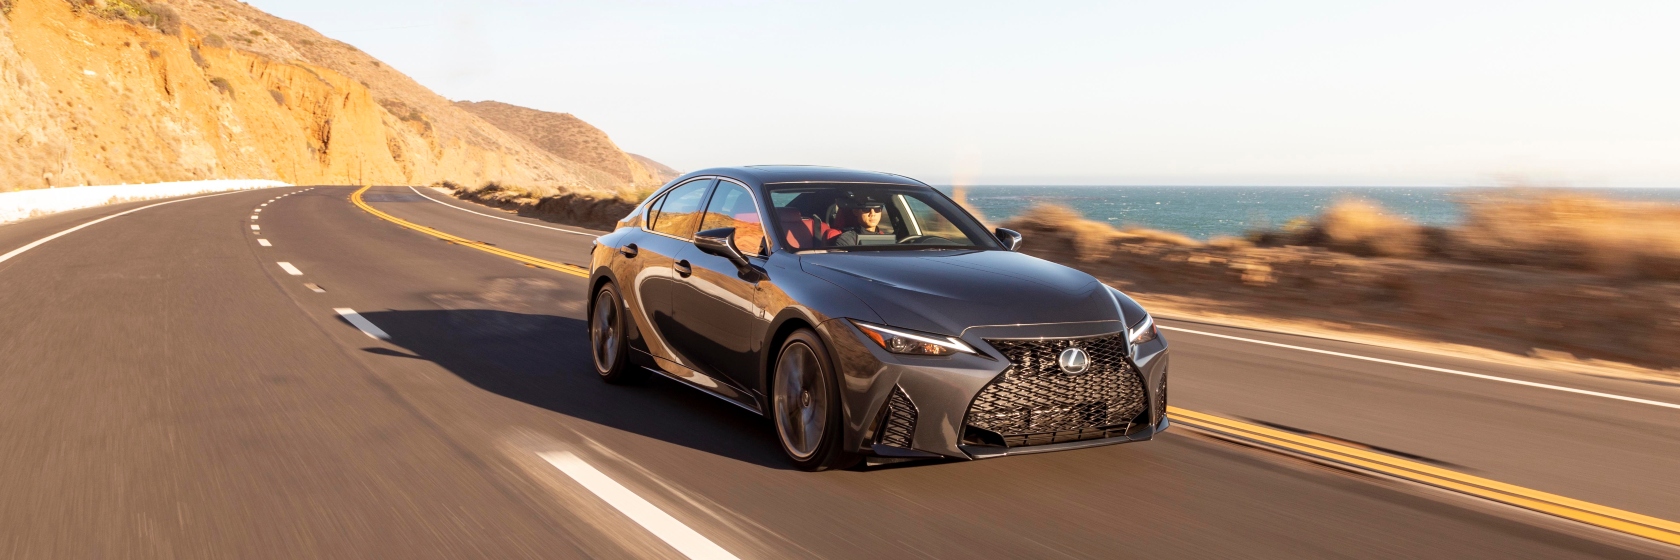 how-to-choose-the-right-lexus-model-for-your-lifestyle